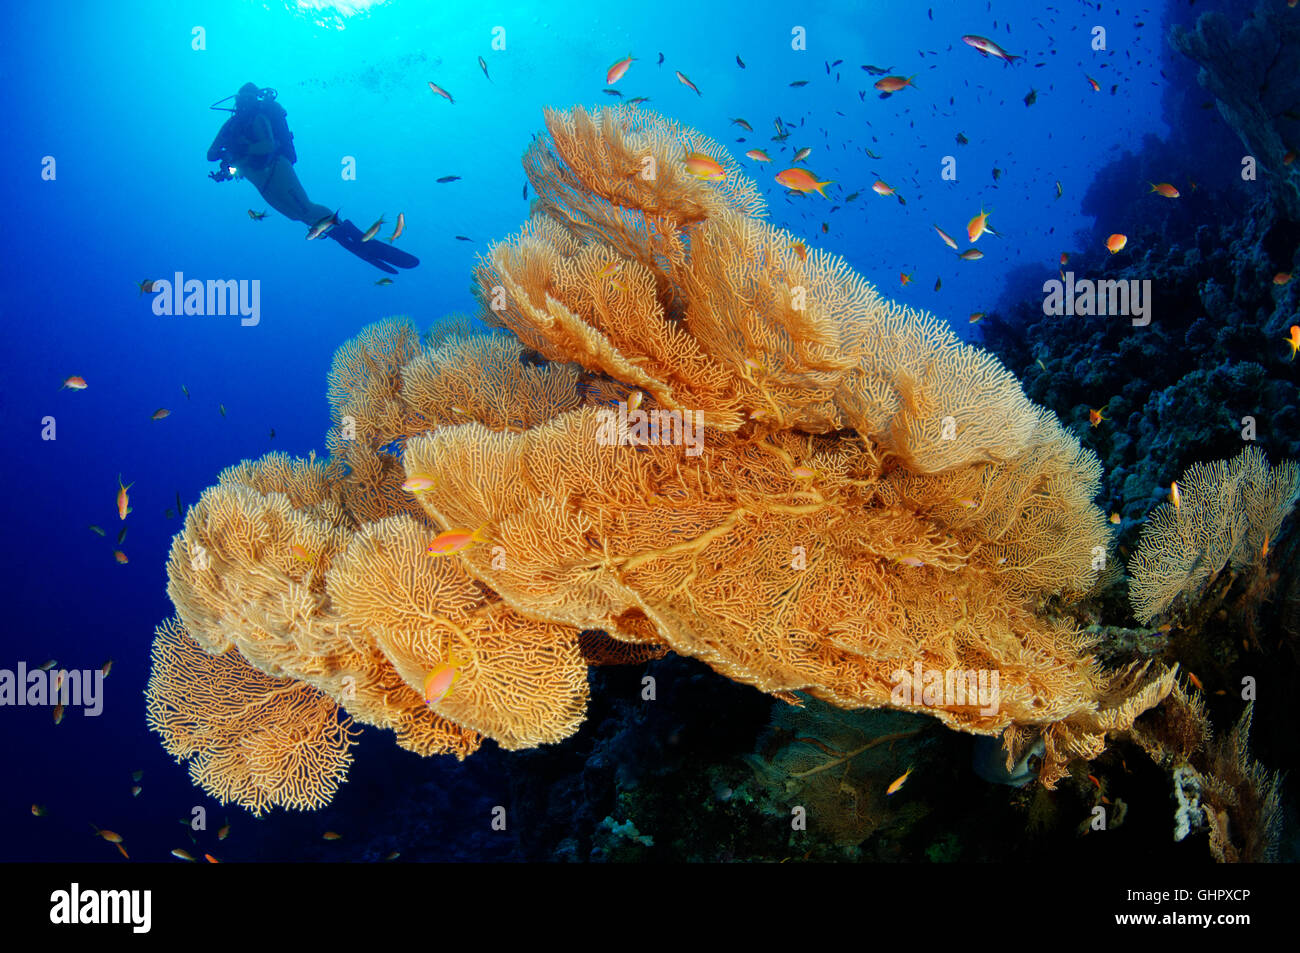 Coral reef with Giant Gorgonian or Sea fan and scuba diver, Hurghada, Giftun Island Reef, Red Sea, Egypt Stock Photo